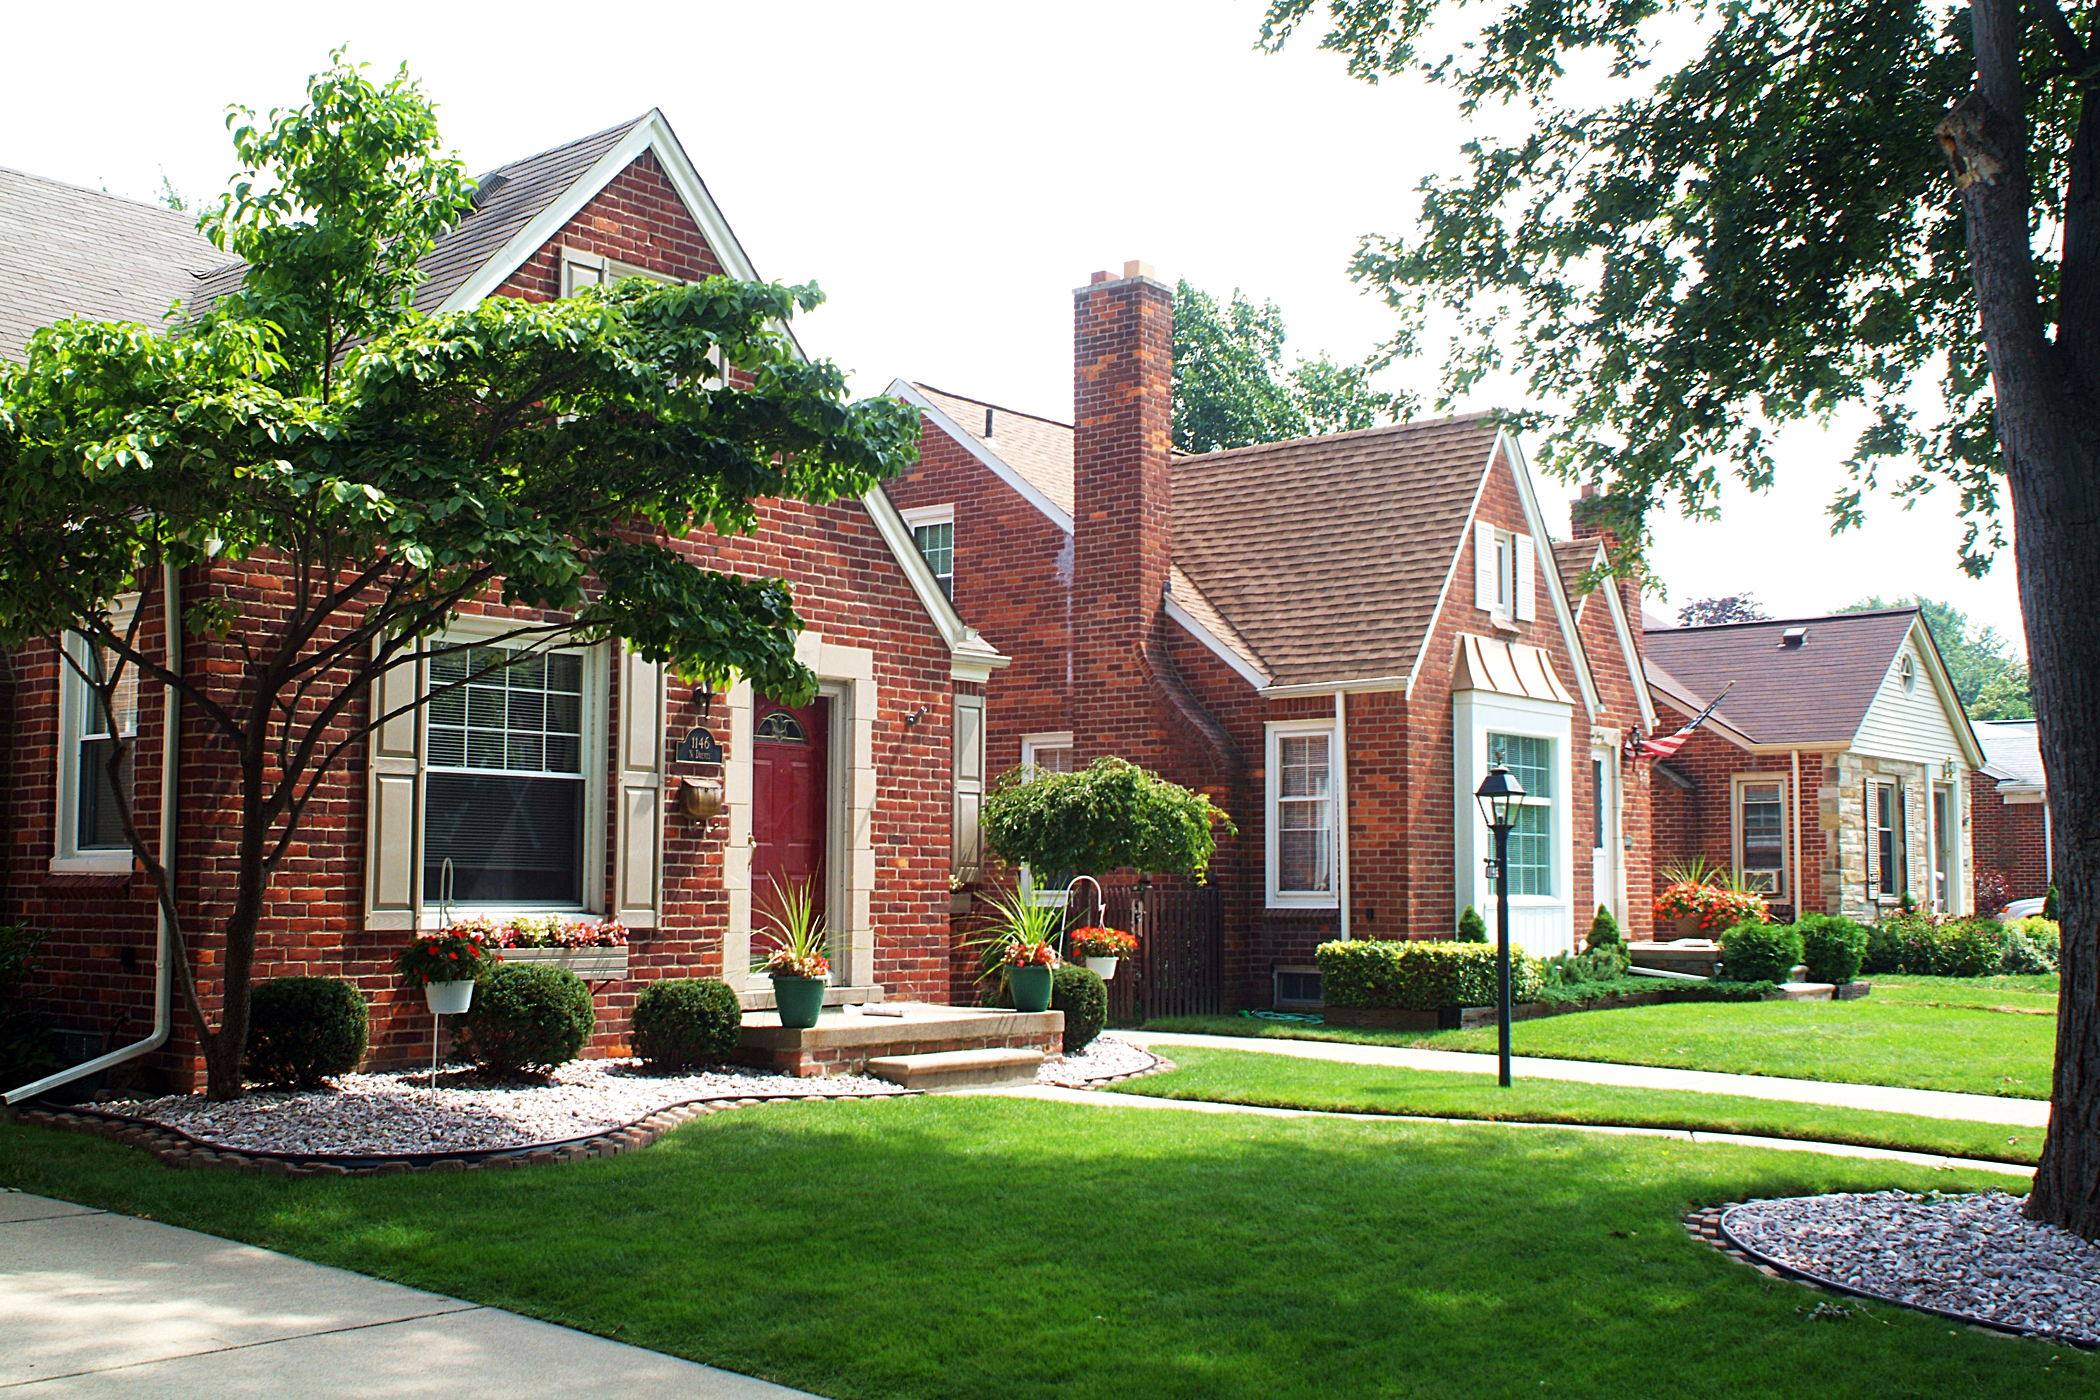 12. Dearborn, Mich.
                            Pop.: 98,452 | Median Home Price: $80,000 | Home Price Increase: 22%